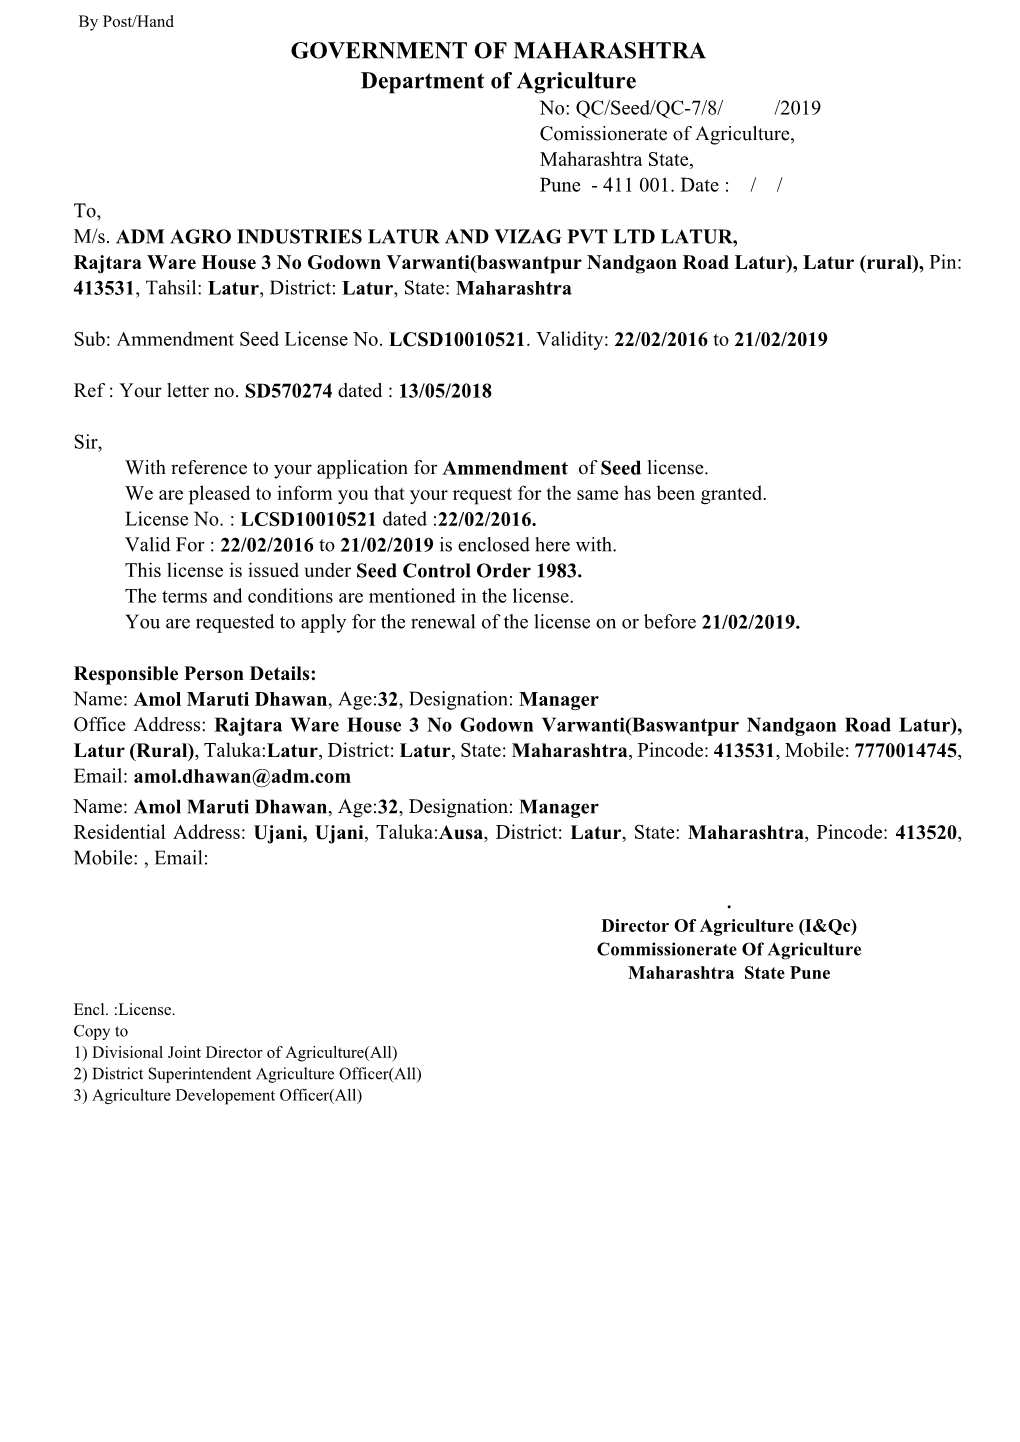 GOVERNMENT of MAHARASHTRA Department of Agriculture No: QC/Seed/QC-7/8/ /2019 Comissionerate of Agriculture, Maharashtra State, Pune - 411 001